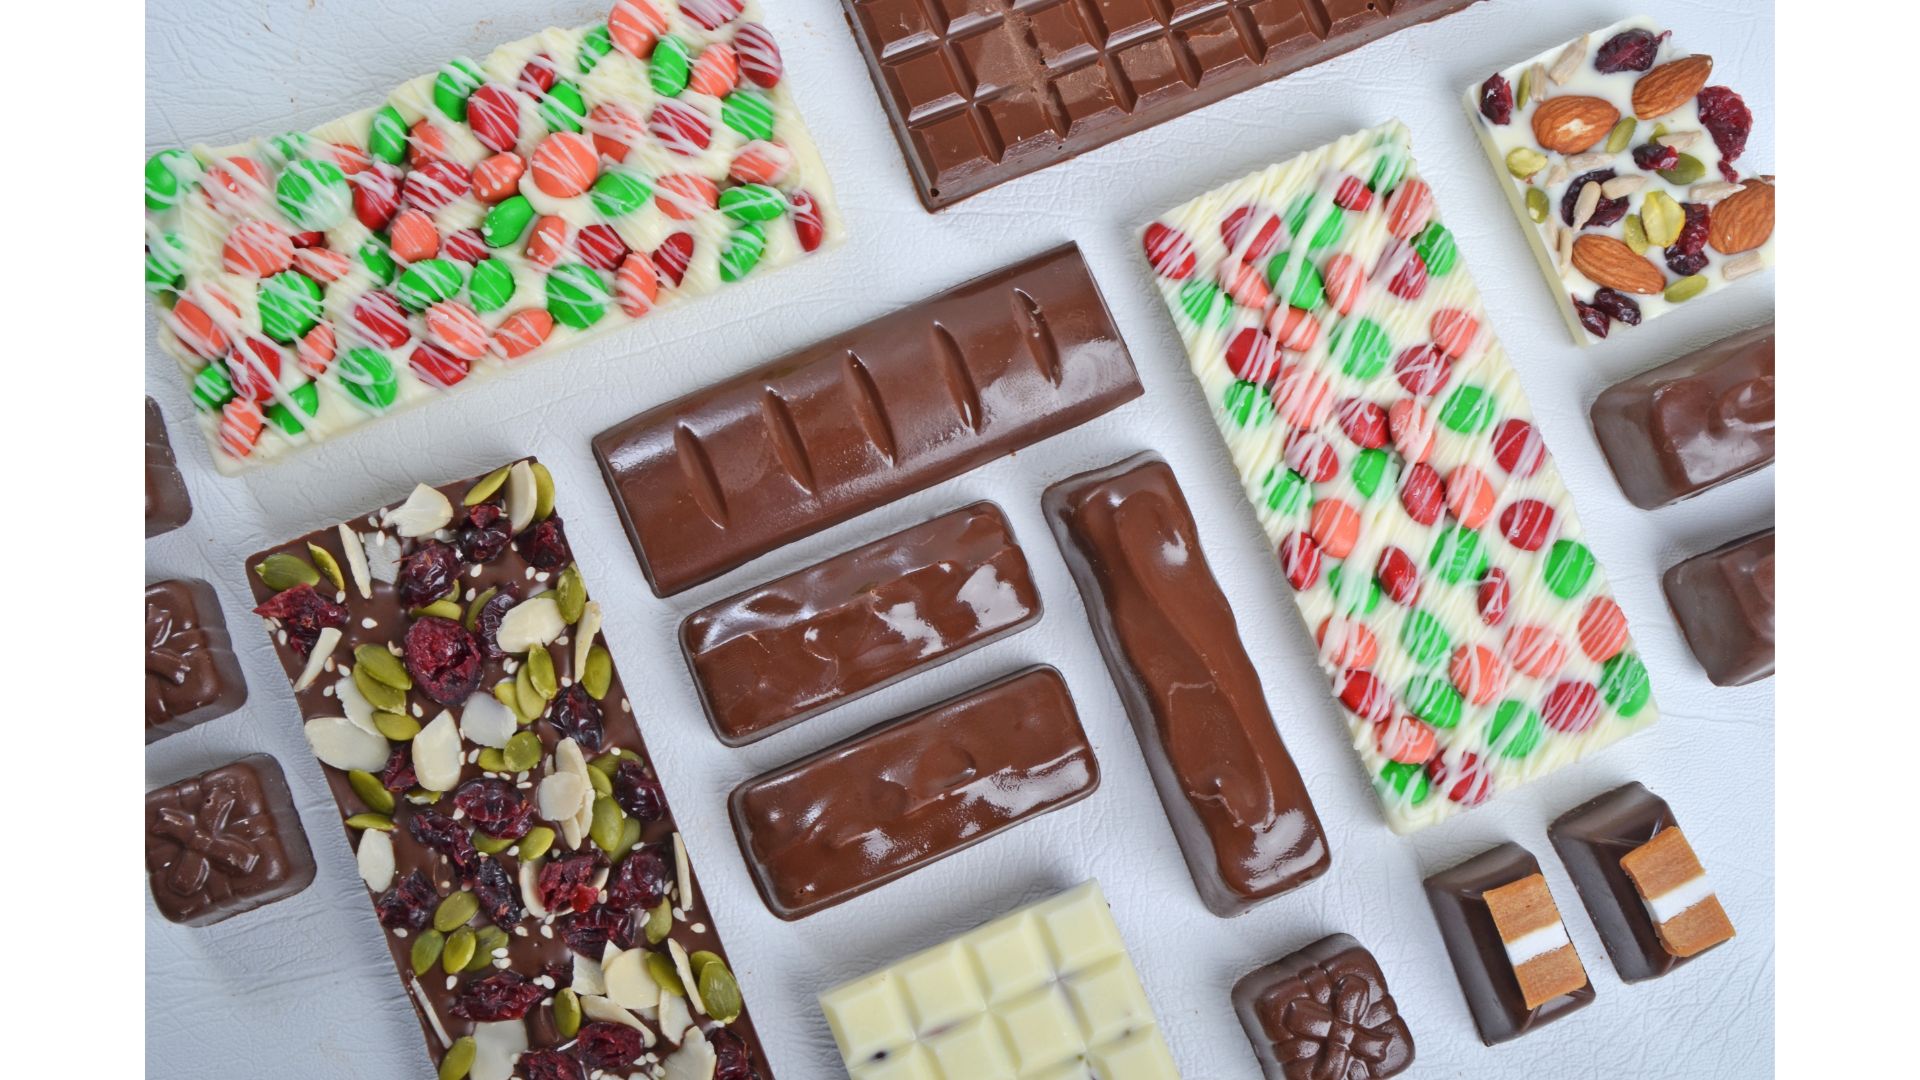 Chocolate Making Supplies Buying Guide